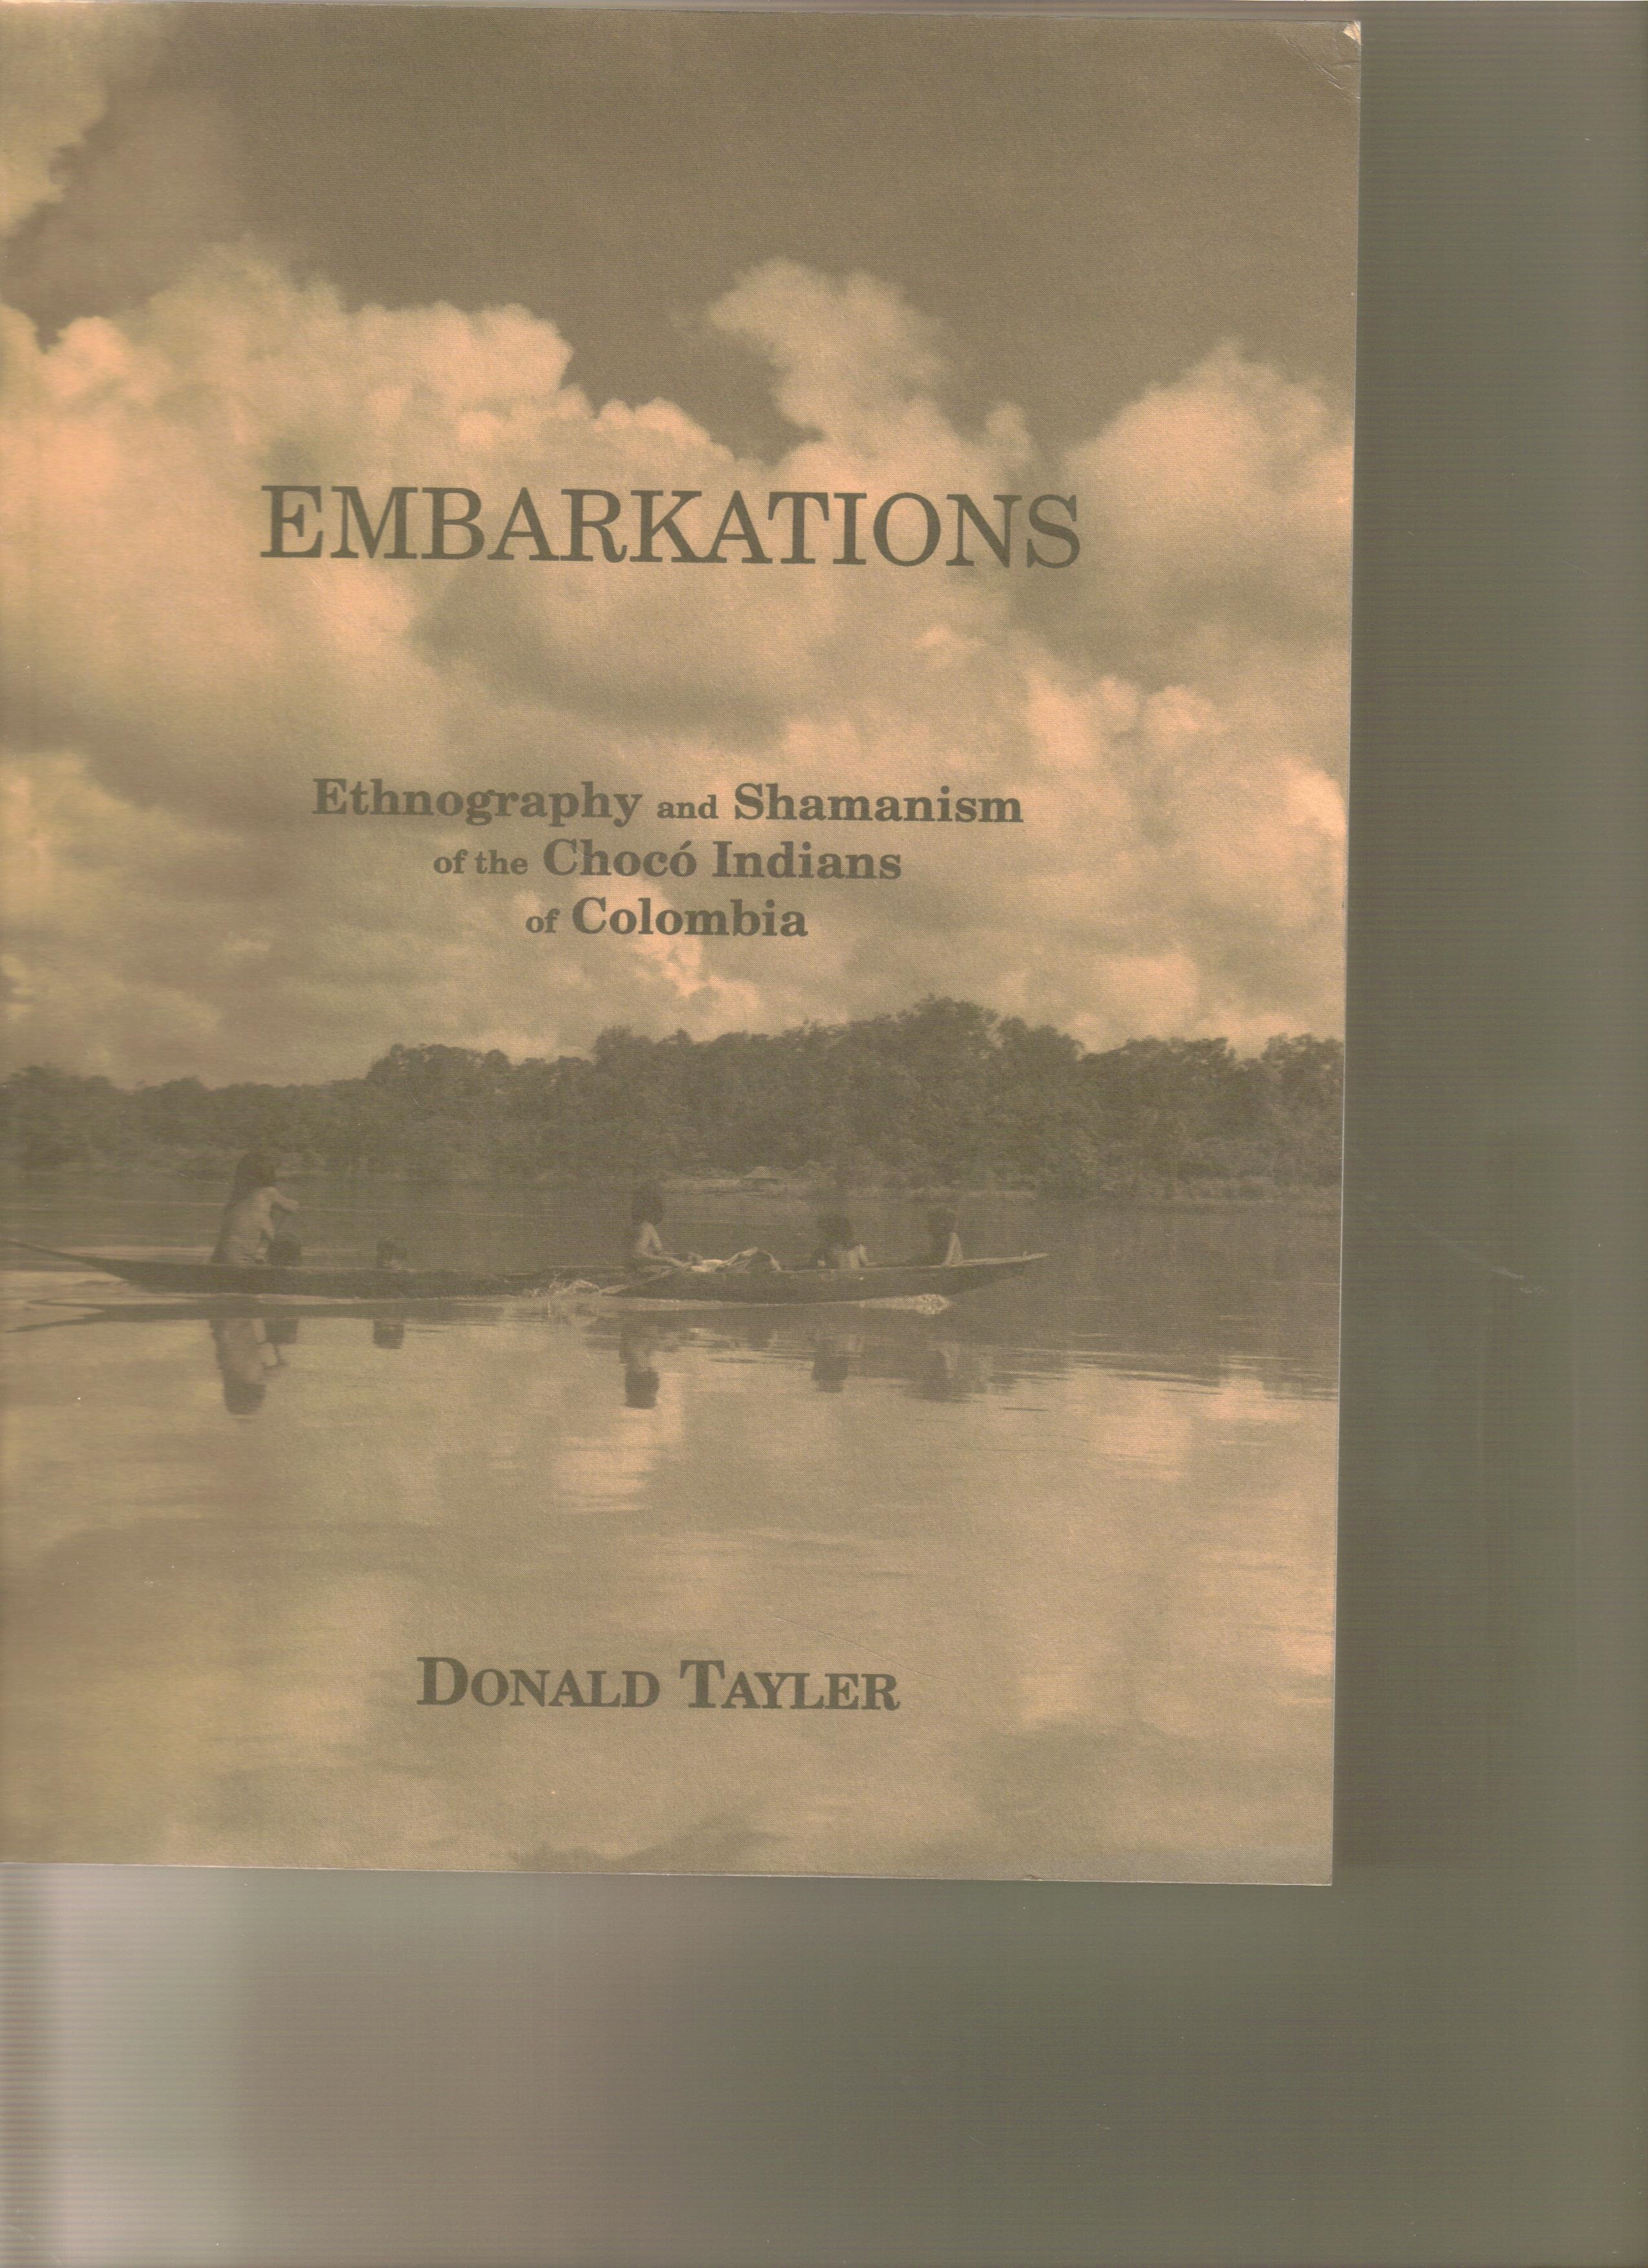 Embarkations: Ethnography and Shamanism of the Choco Indians of Columbia